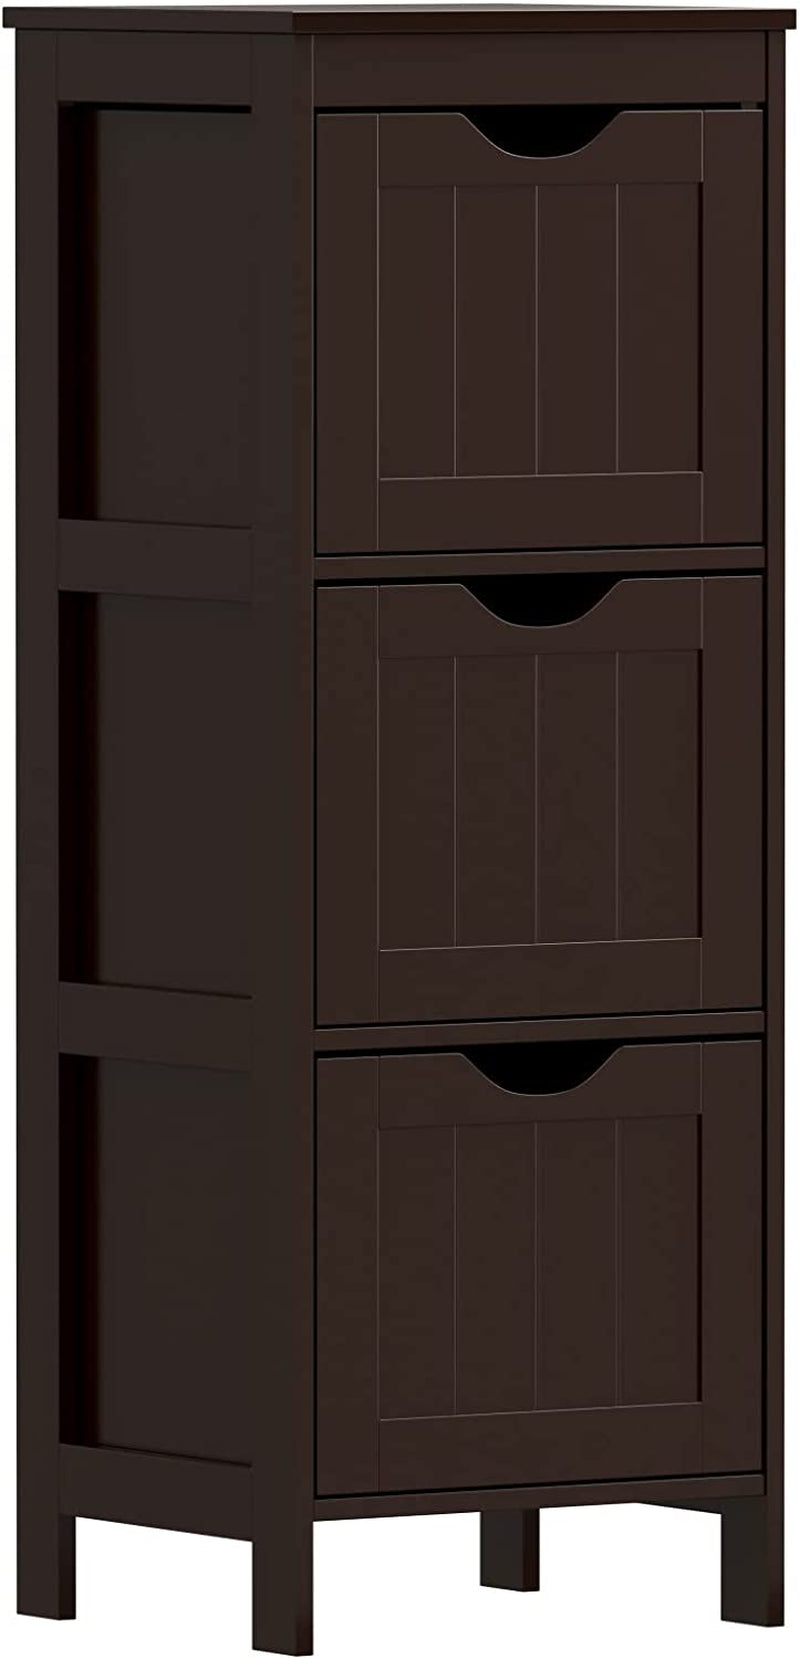 Reettic Narrow Bathroom Storage Cabinet with 3 Removable Drawers, DIY, Freestanding Side Storage Organizer for Bedroom, Living Room, Entryway, 11.8" L X 11.8" W X 35" H, Brown BYSG102Z Home & Garden > Household Supplies > Storage & Organization Reettic Brown 11.8"L x 11.8"W x 35"H 